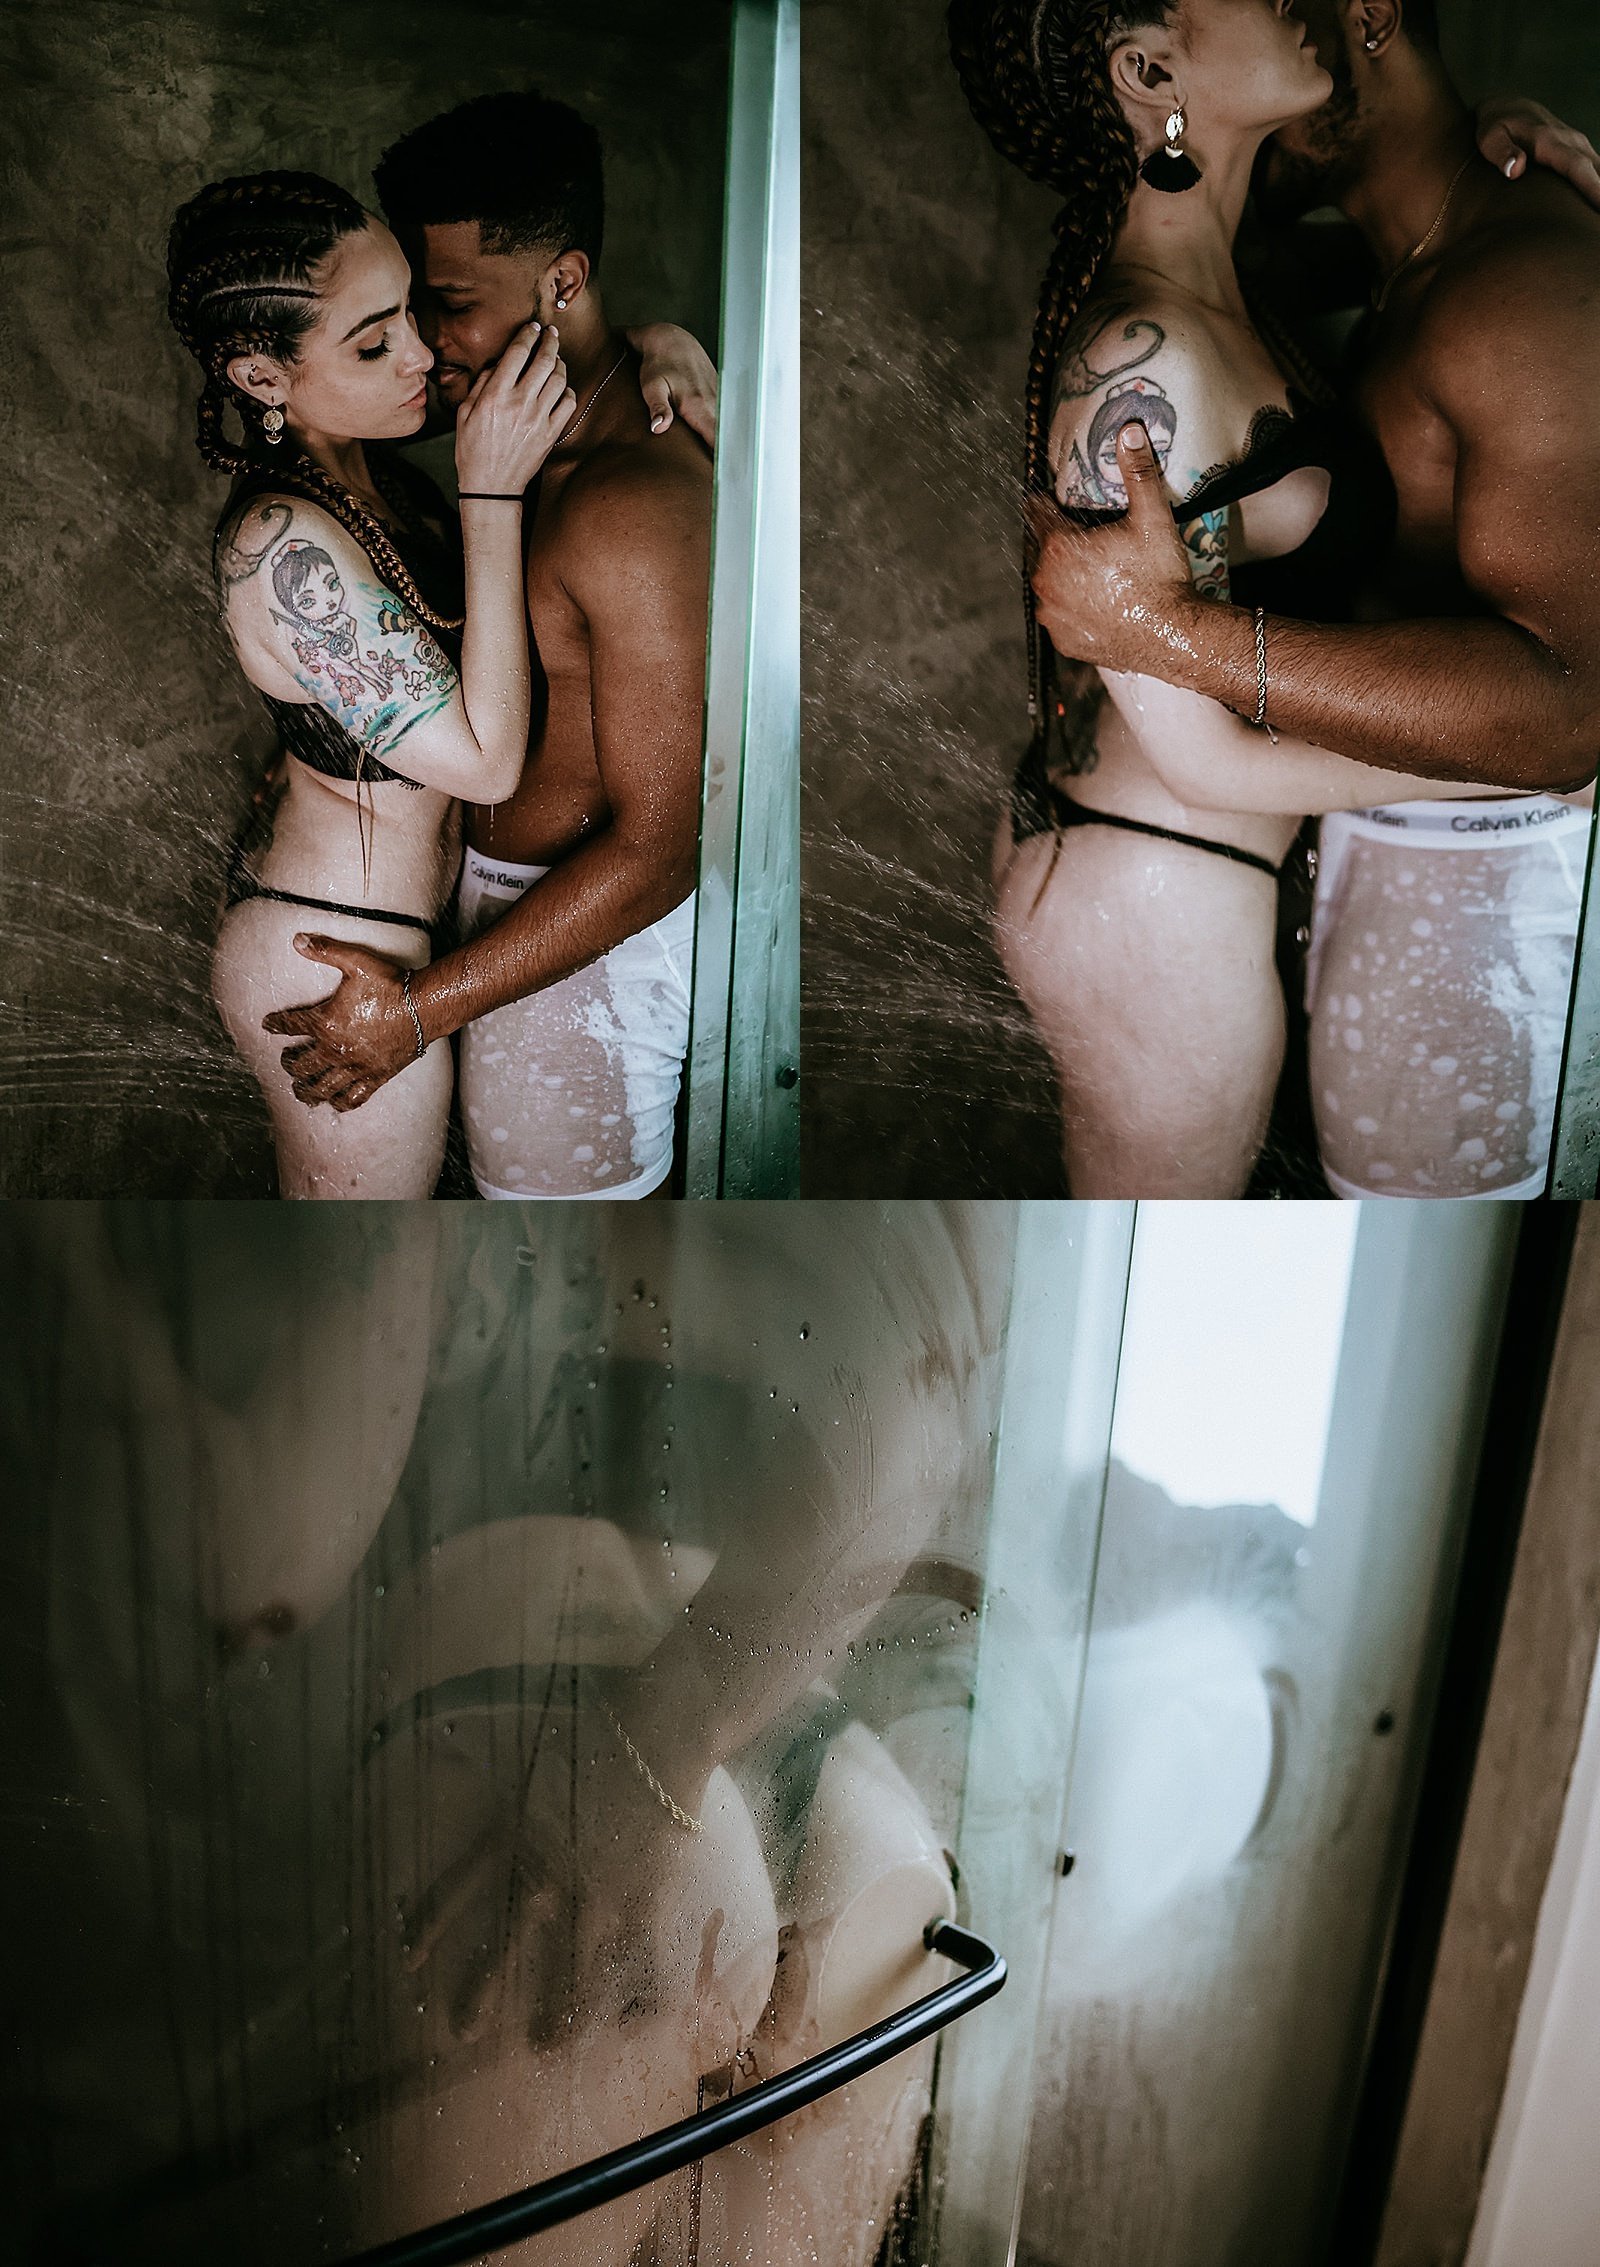  Couple in the shower for their steamy couples session 